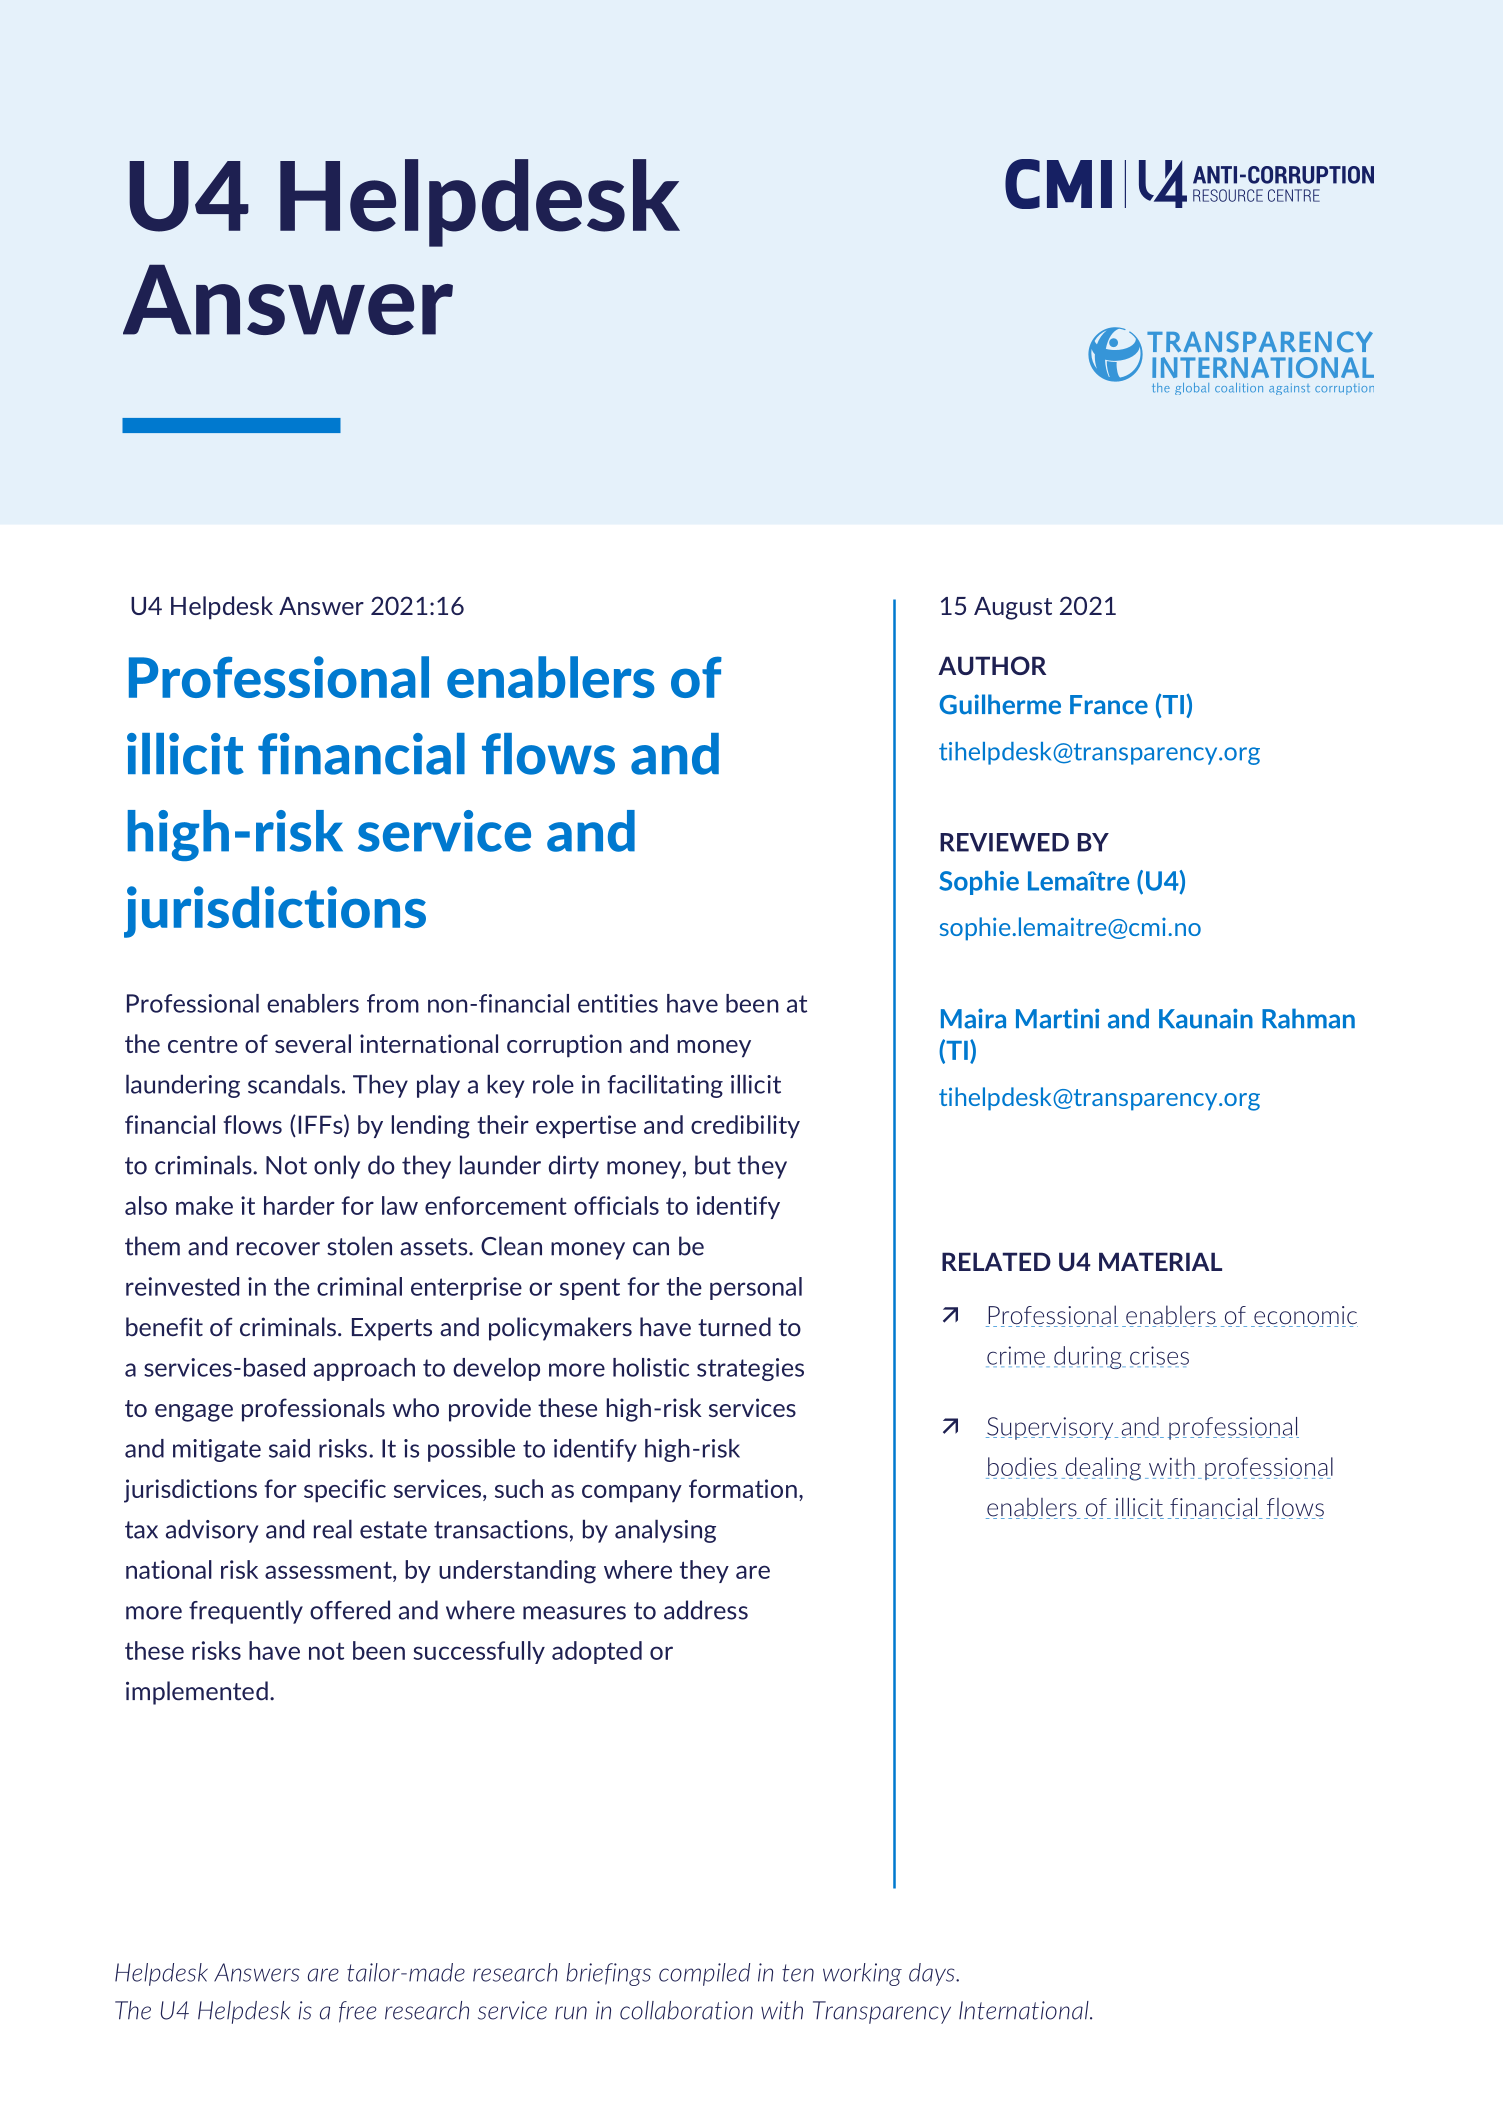 Professional enablers of illicit financial flows and high-risk service and jurisdictions